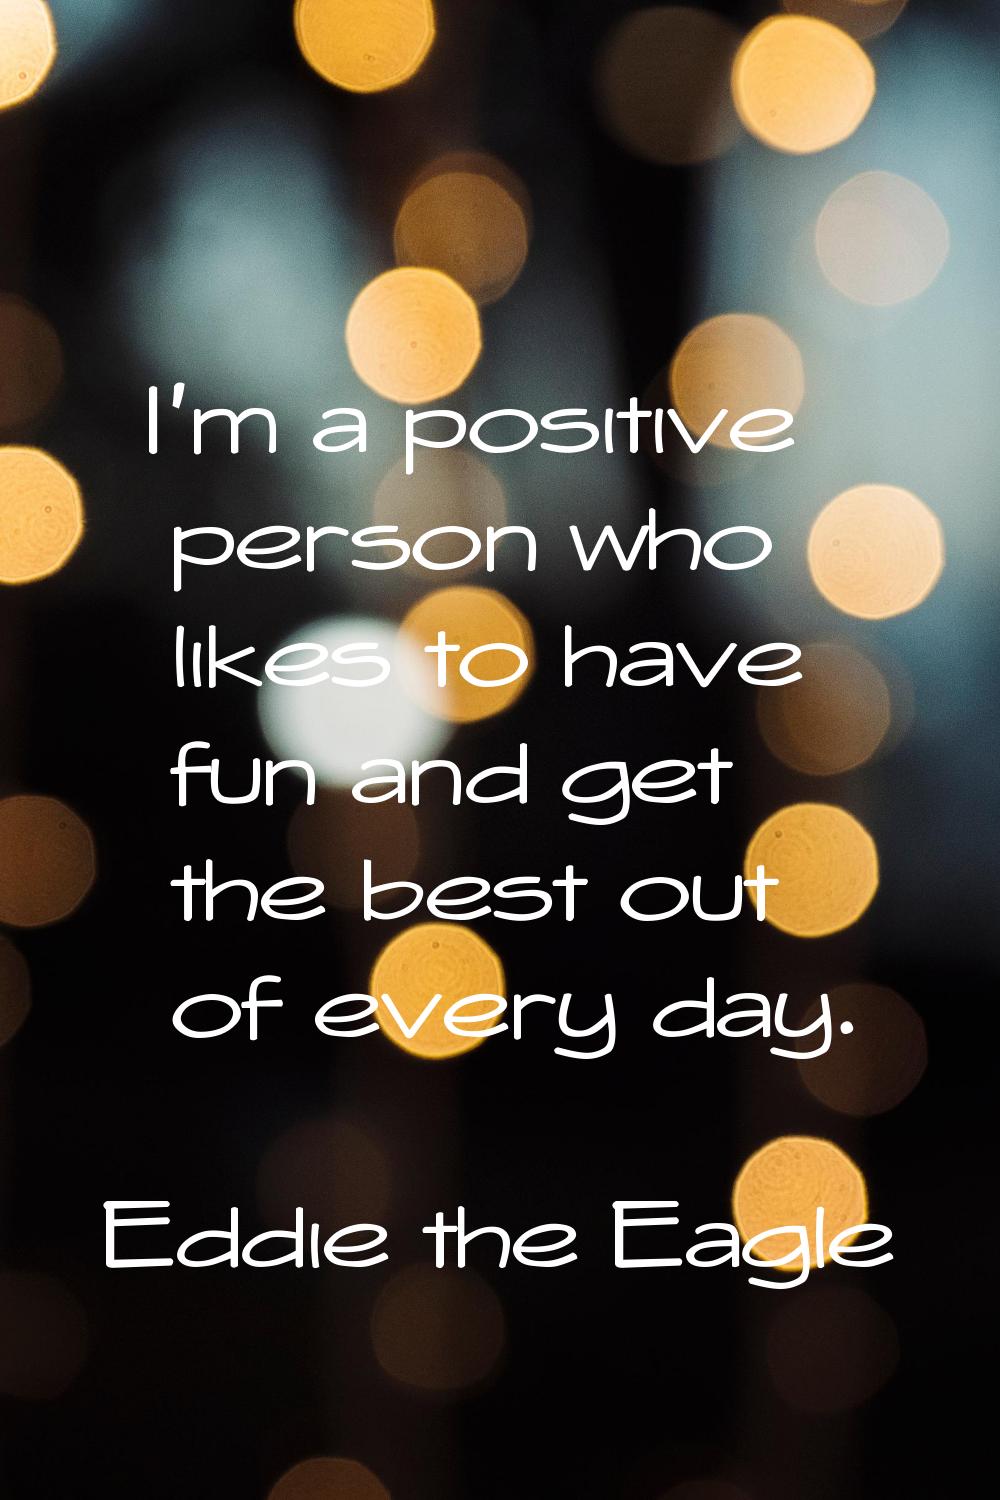 I'm a positive person who likes to have fun and get the best out of every day.